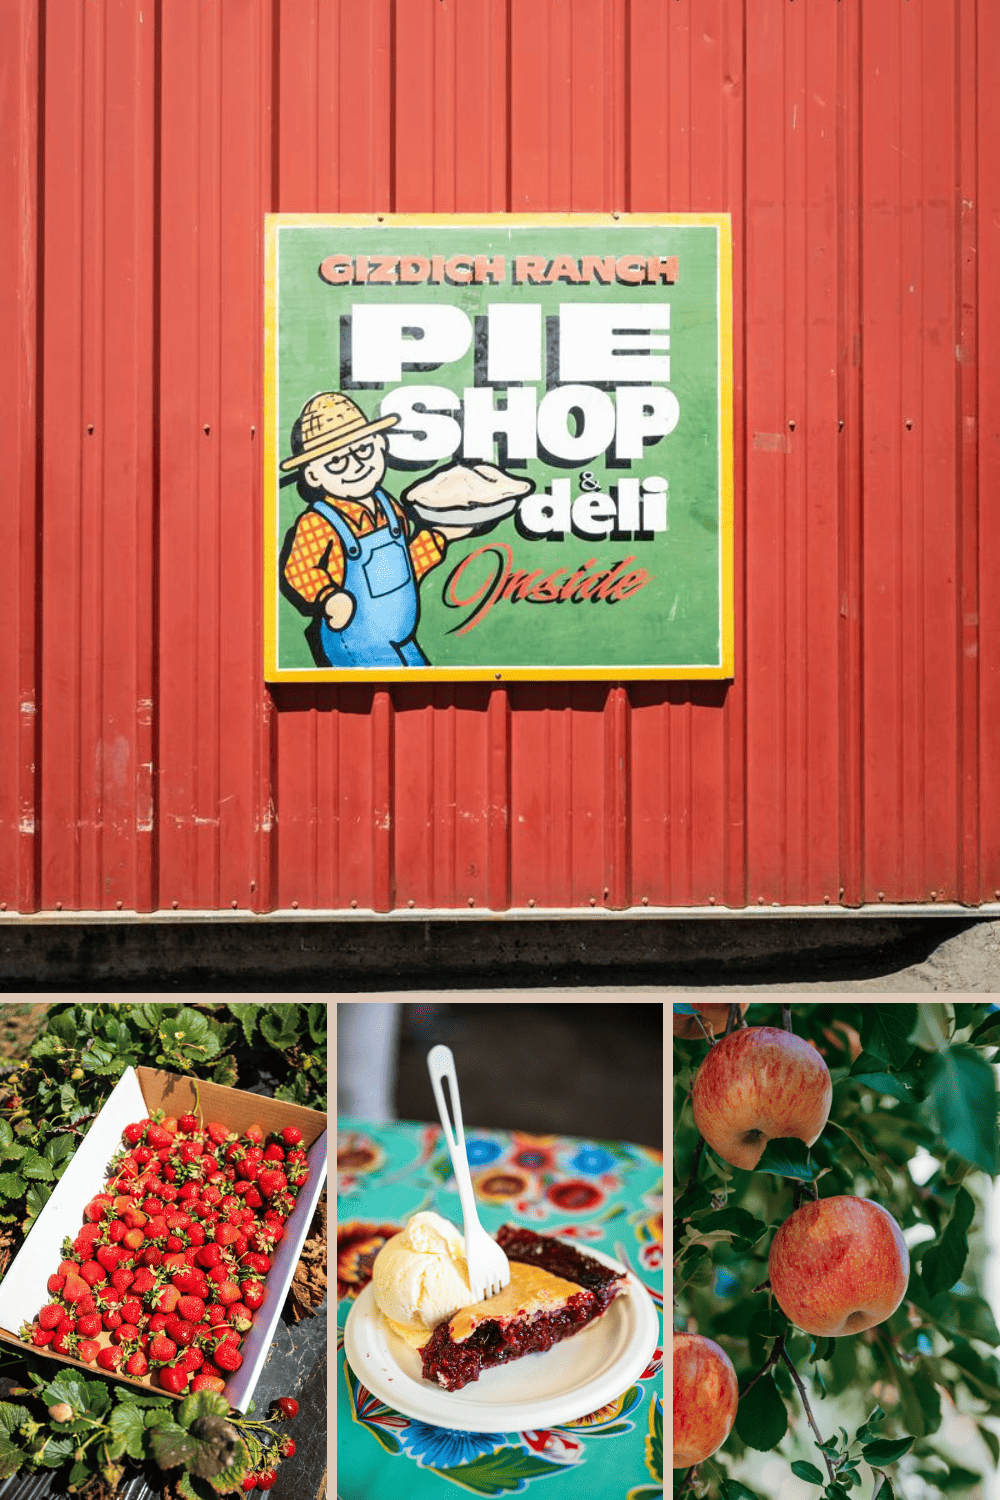 Apple-picking Adventures and Pie Perfection: A Day at Gizdich Ranch in Watsonville